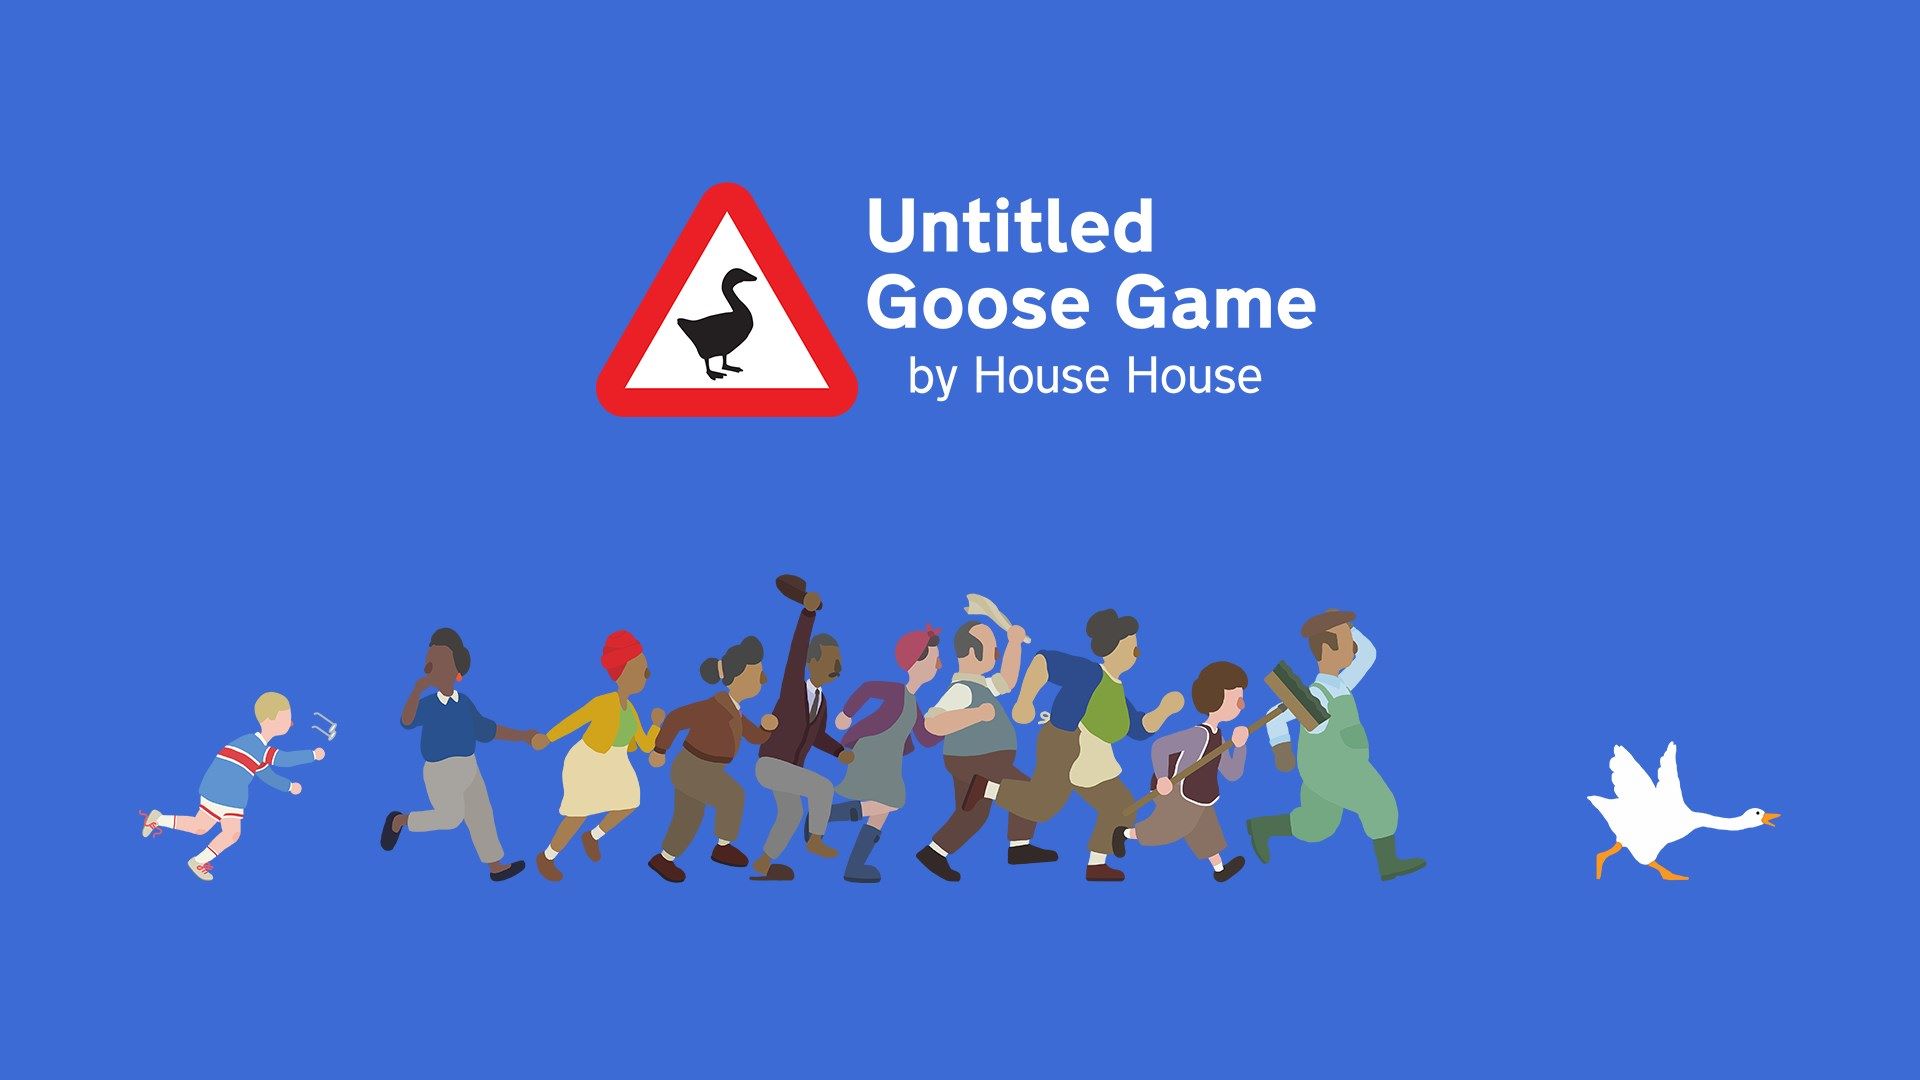 Thank you for playing our videogame achievement in Untitled Goose Game